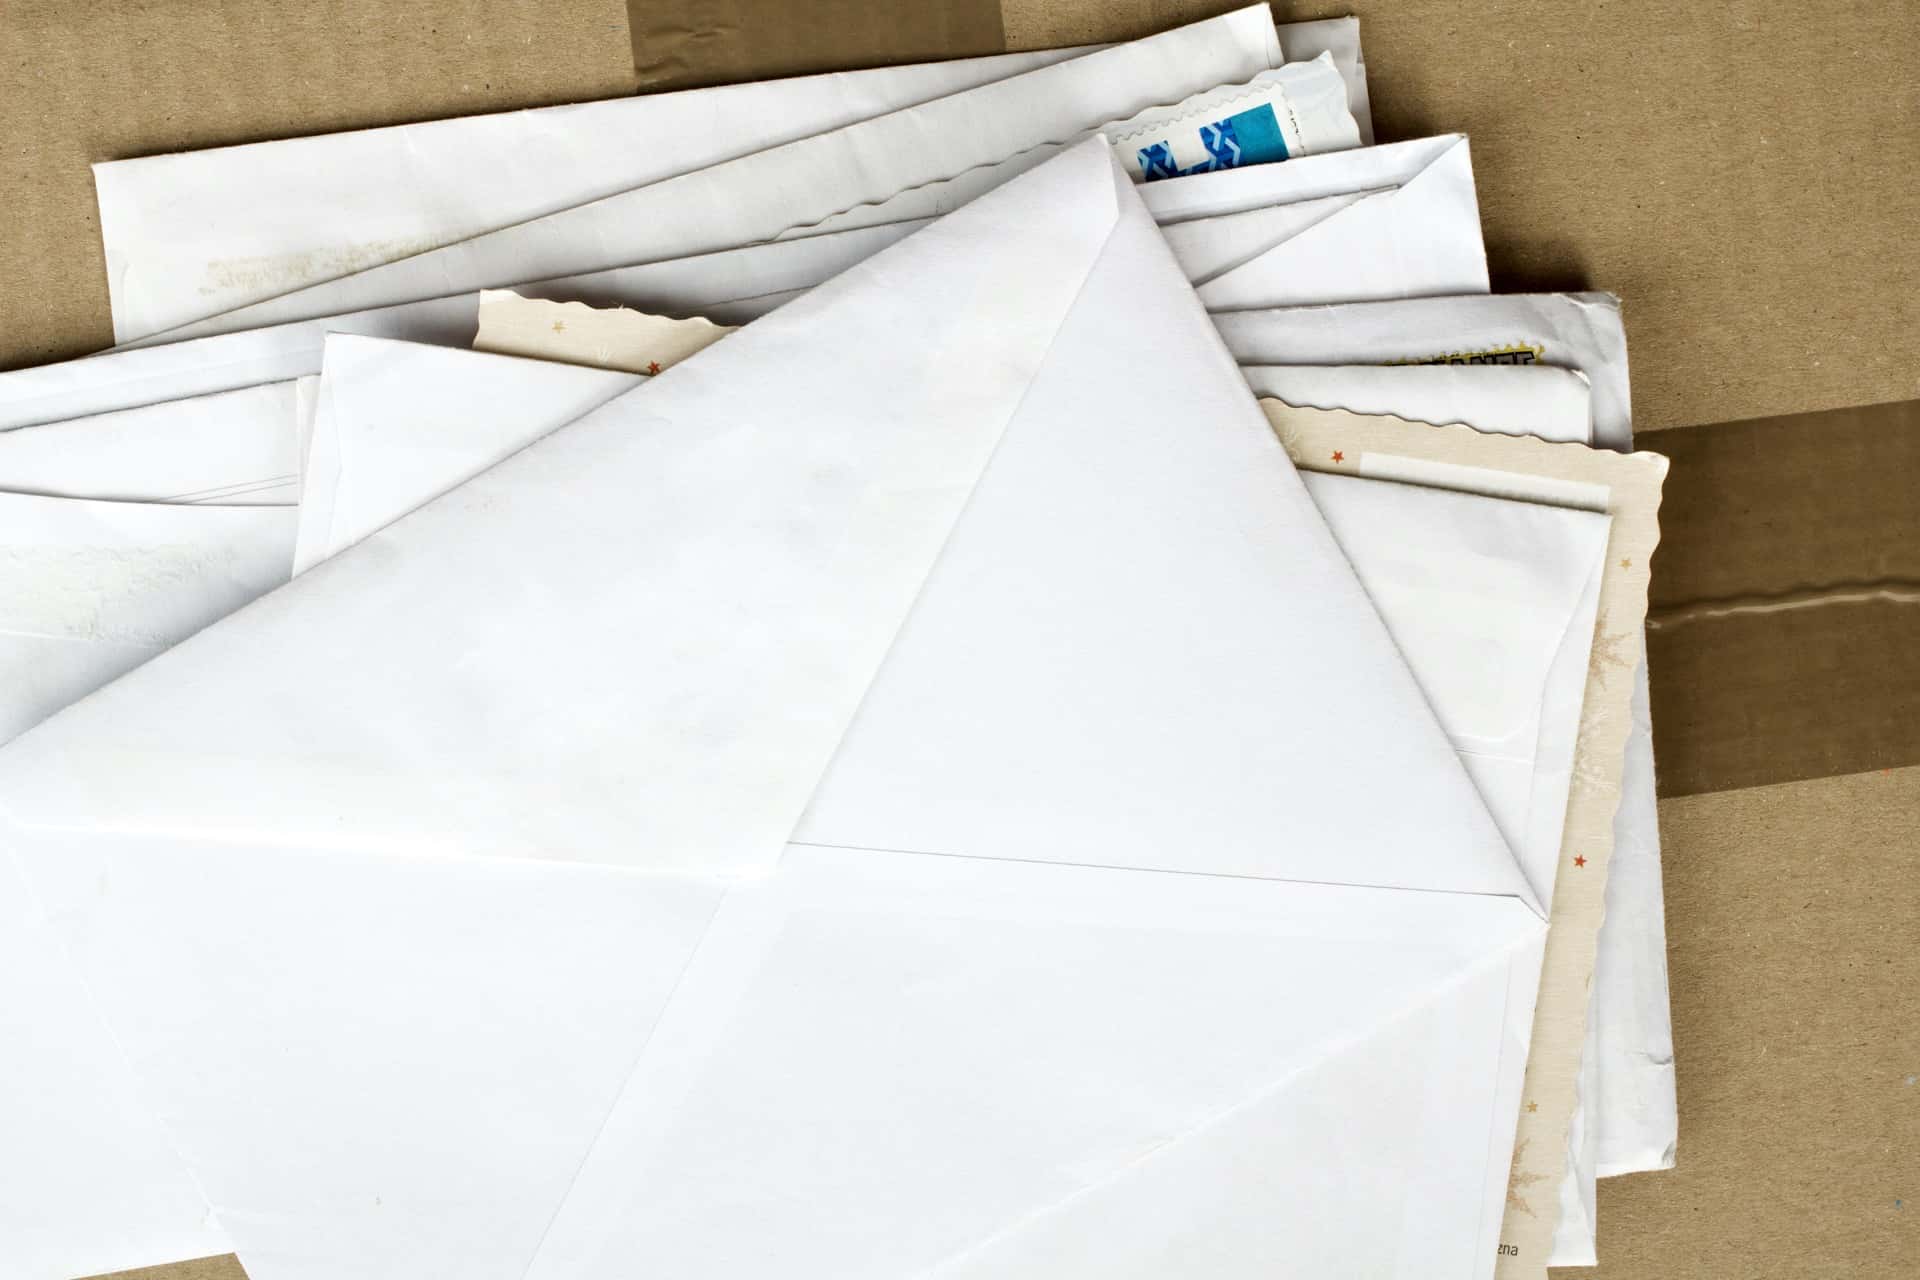 A stack of aged envelopes and letters